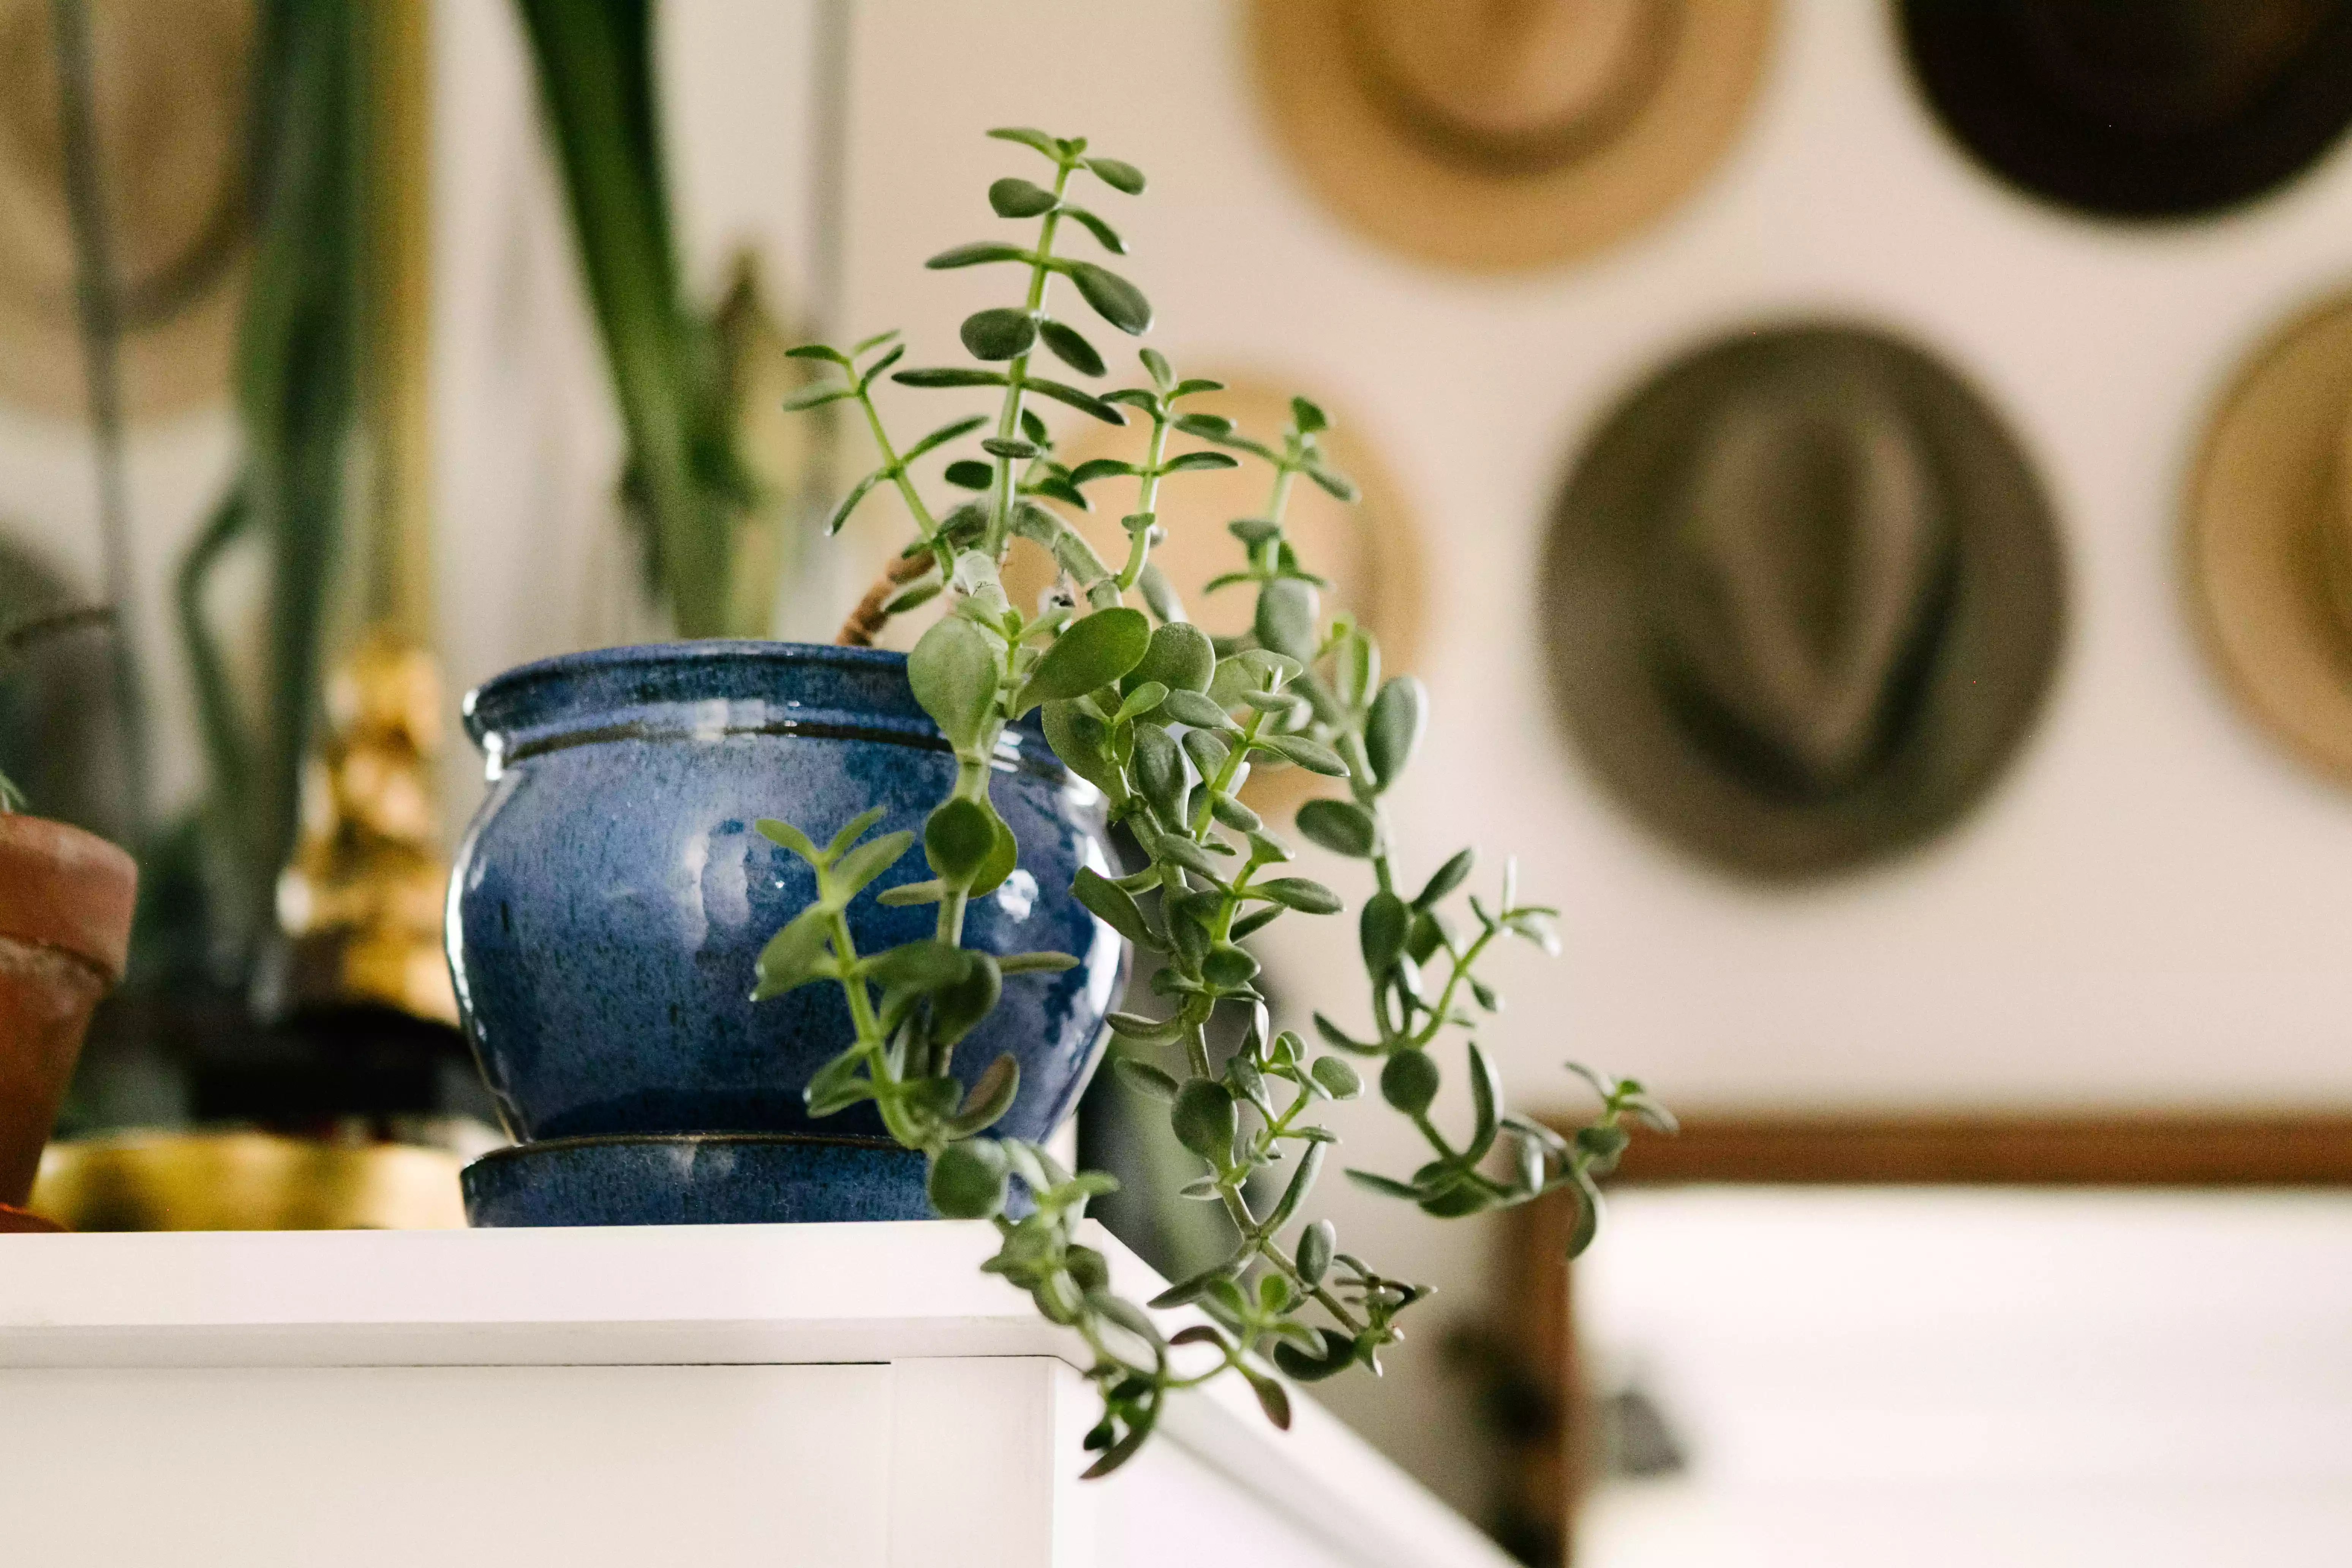 jade plant in blue pot sits on shelf against wall of hats